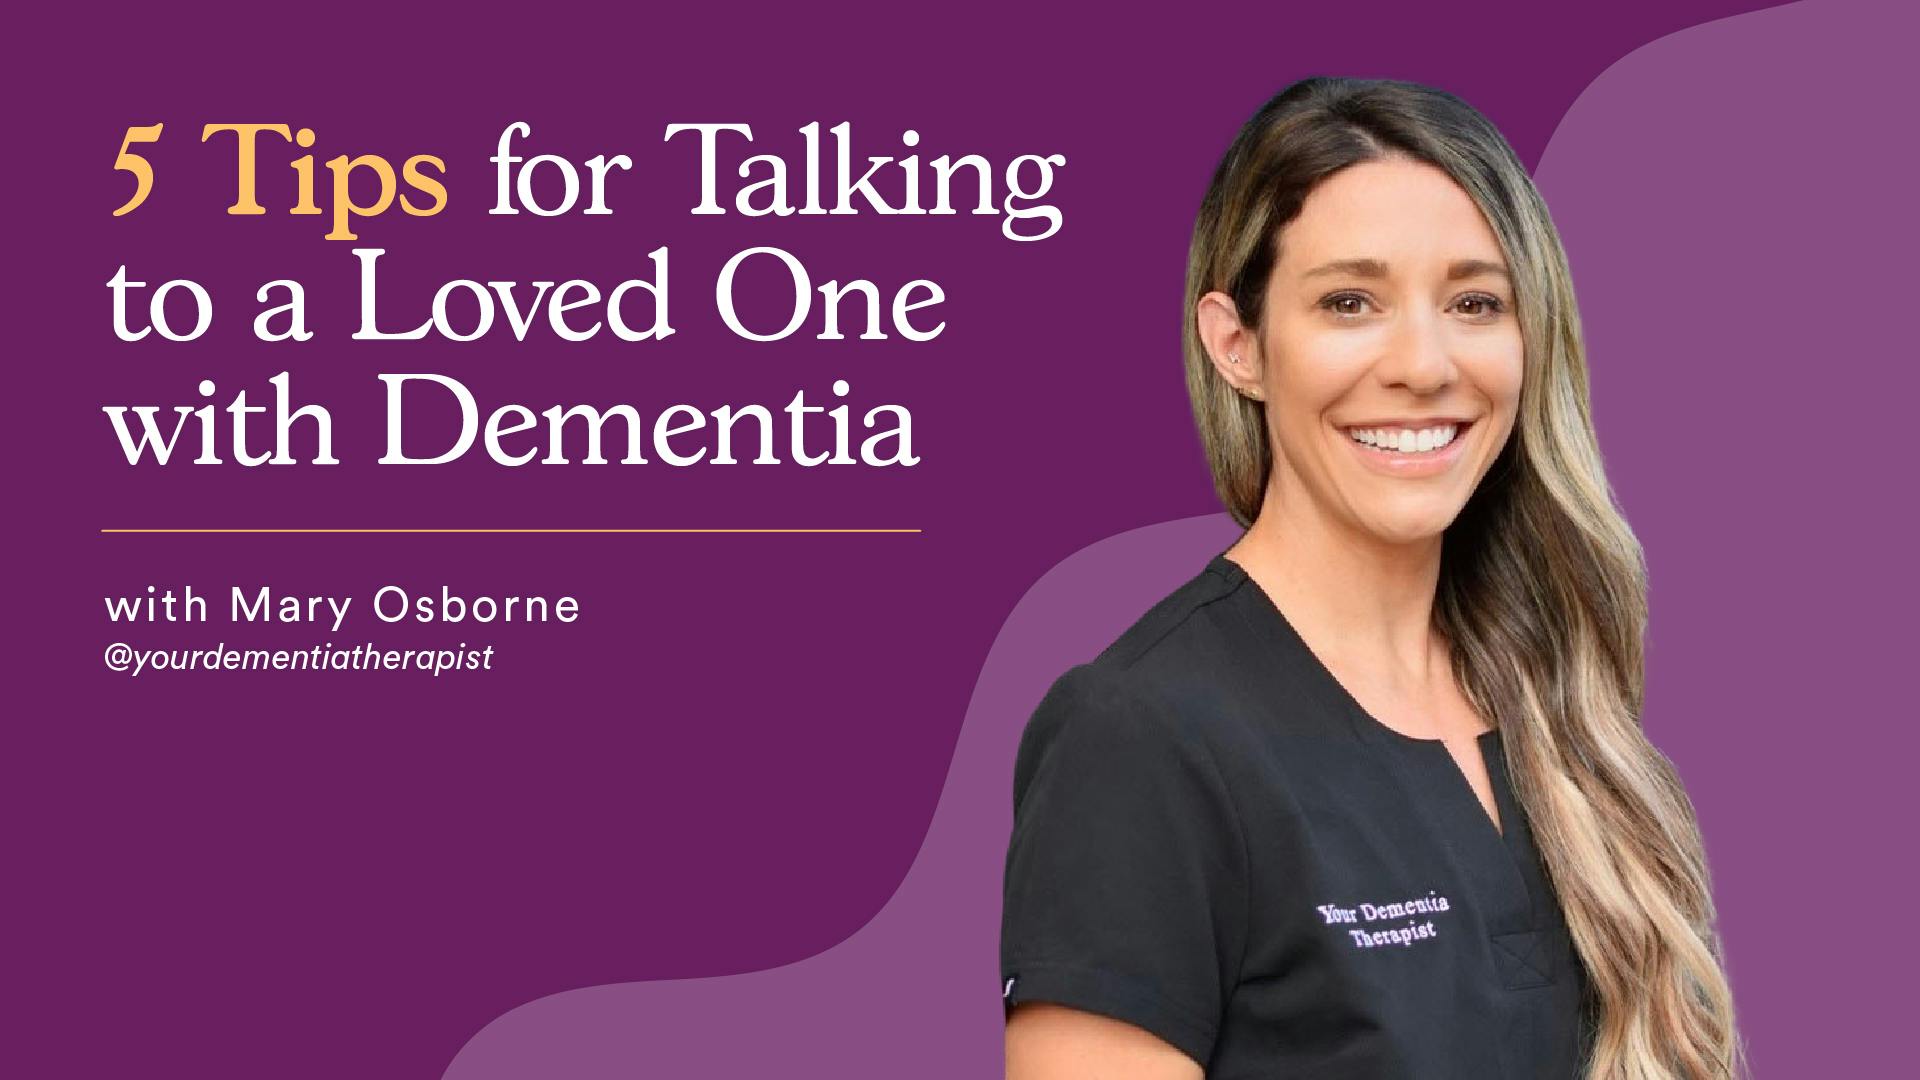 Occupational therapist Mary Osborne shares tips for communicating effectively with someone with dementia